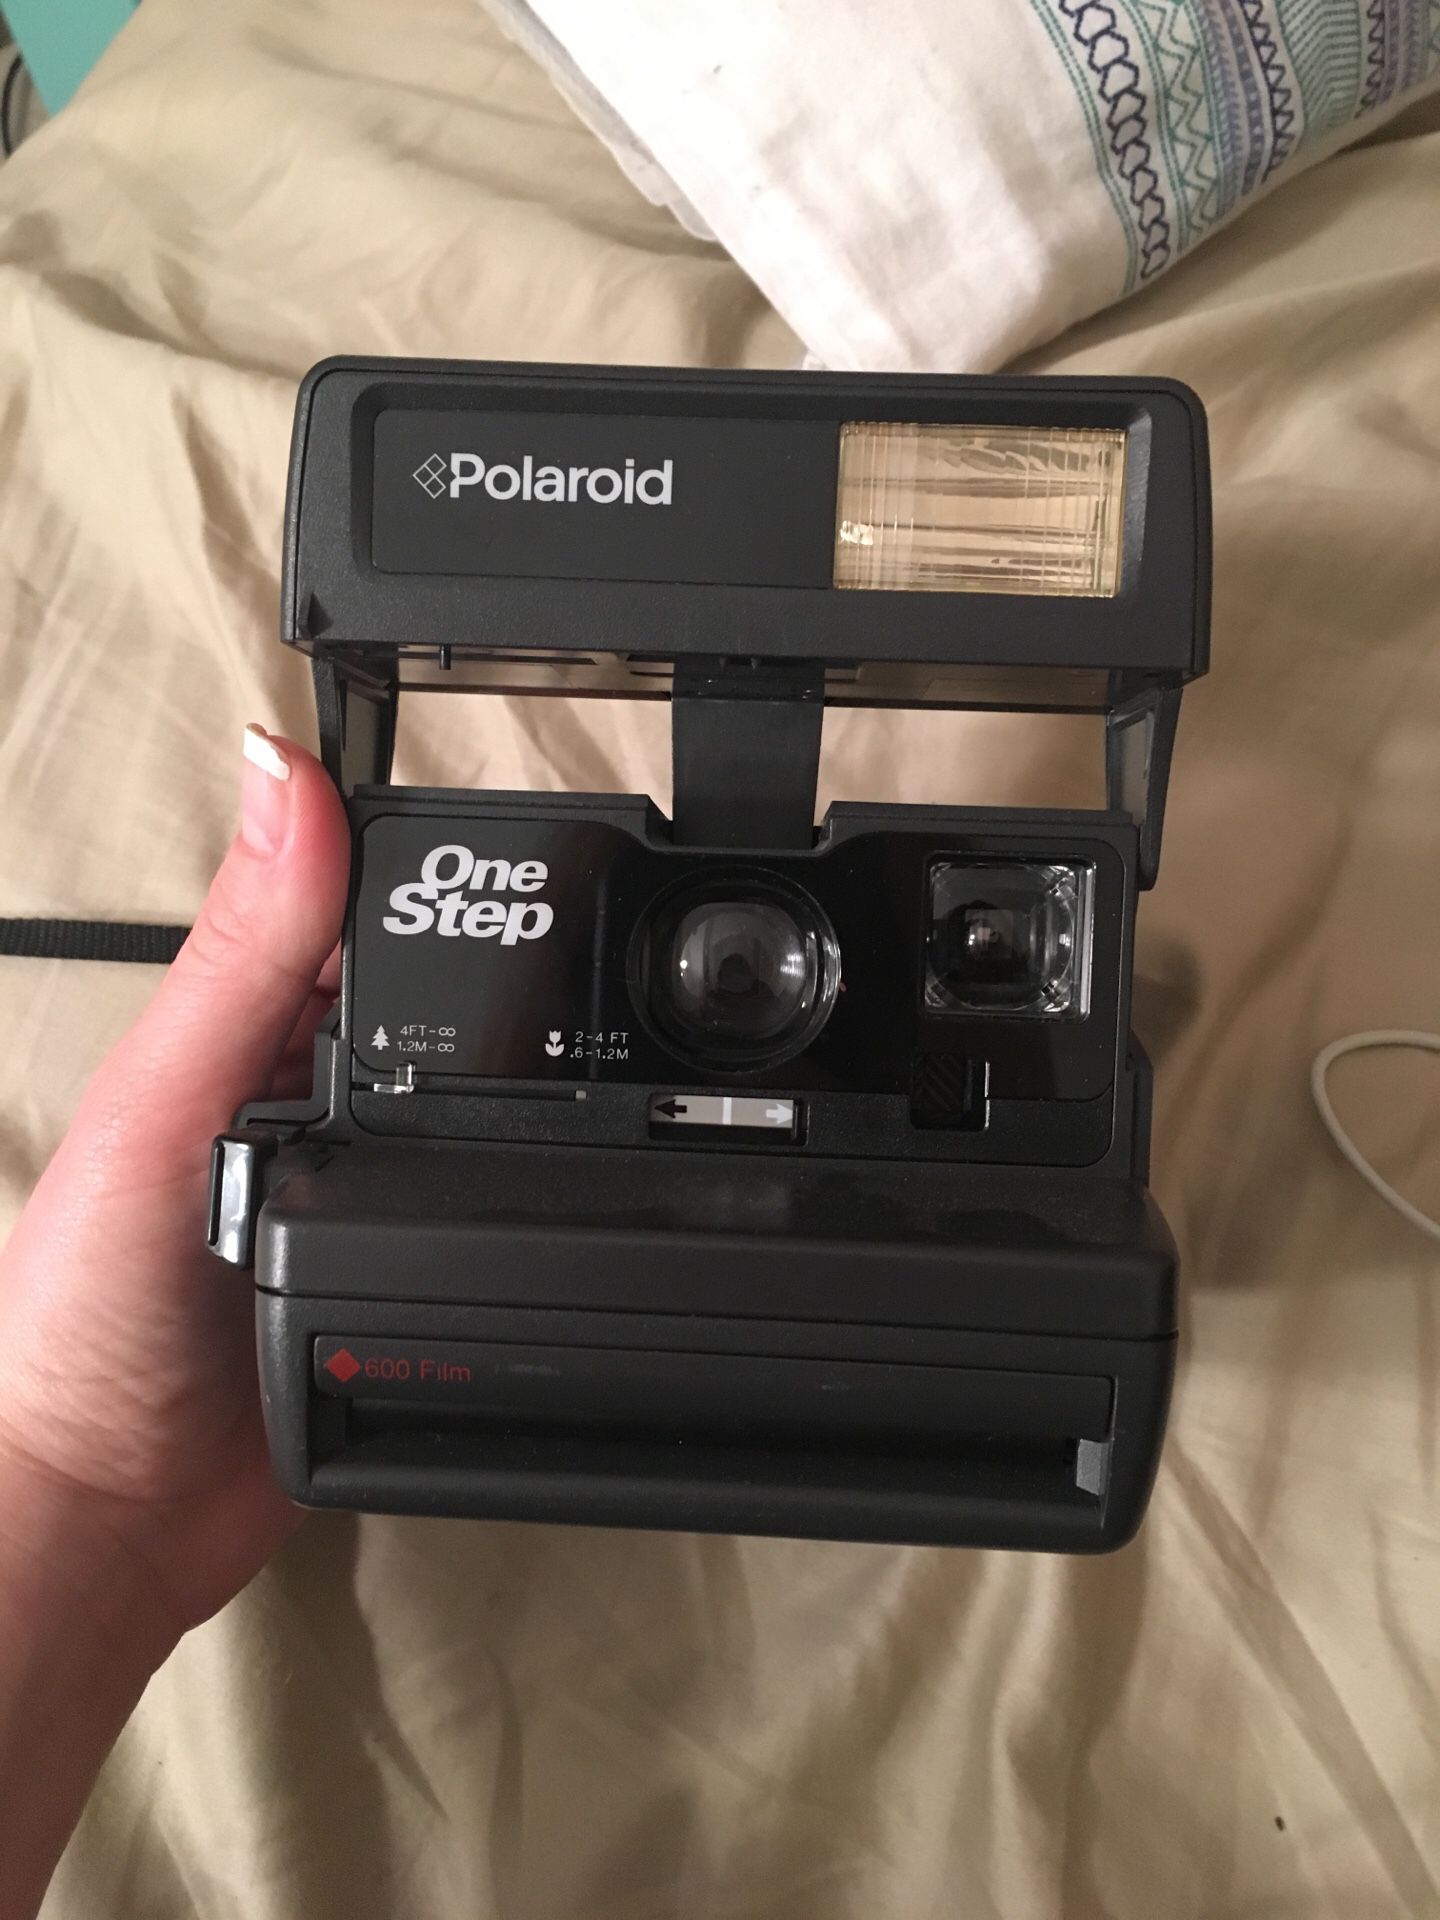 Old poloroid